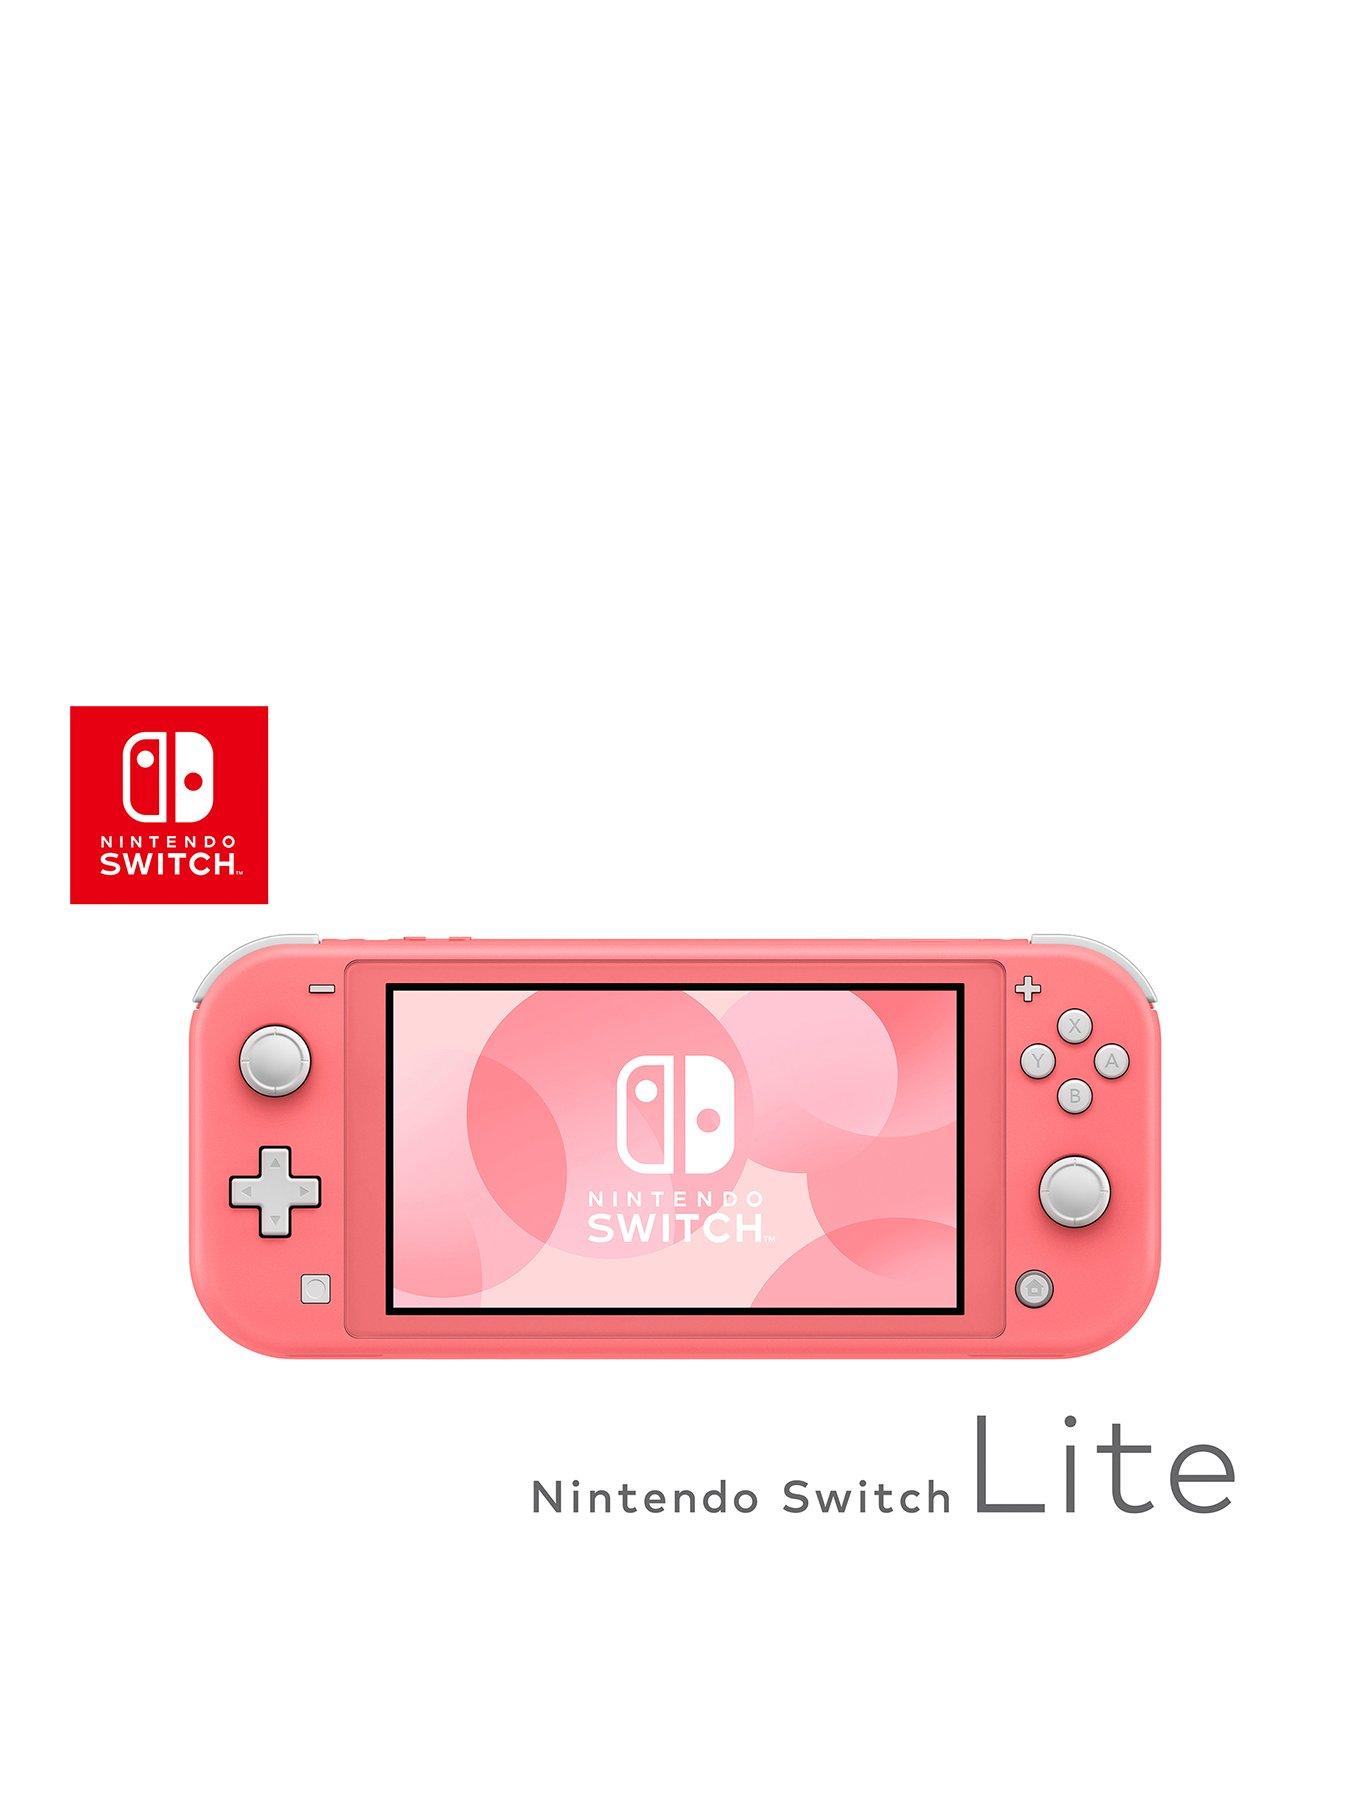 Product - Nintendo Switch Lite - Turquoise + Bluey: The Videogame